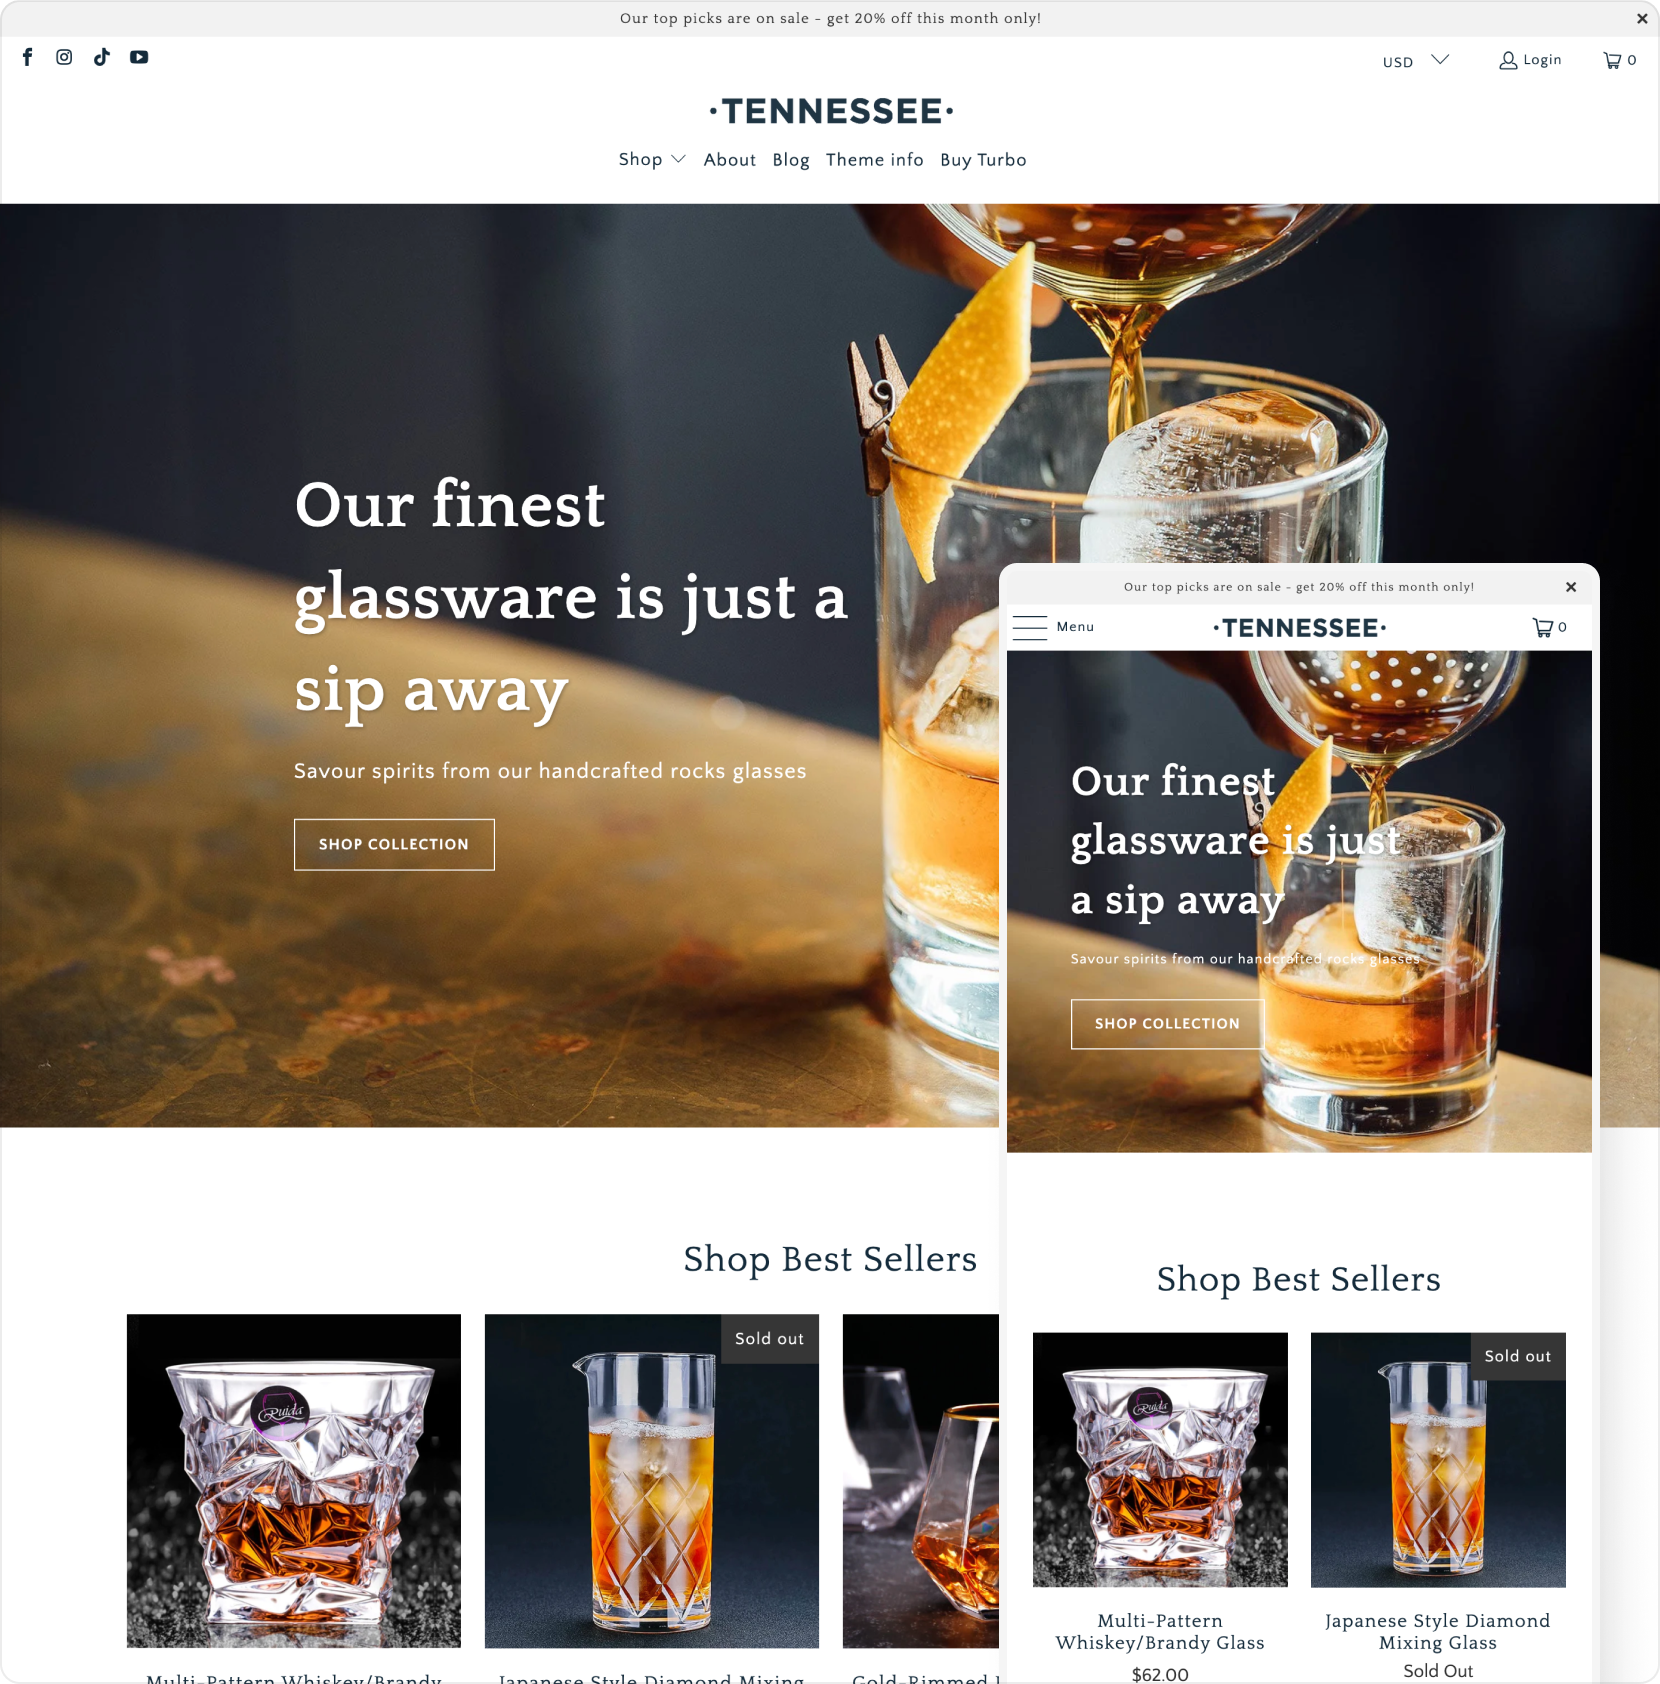 turbo shopify theme tennessee theme style home page shown desktop and mobile devices